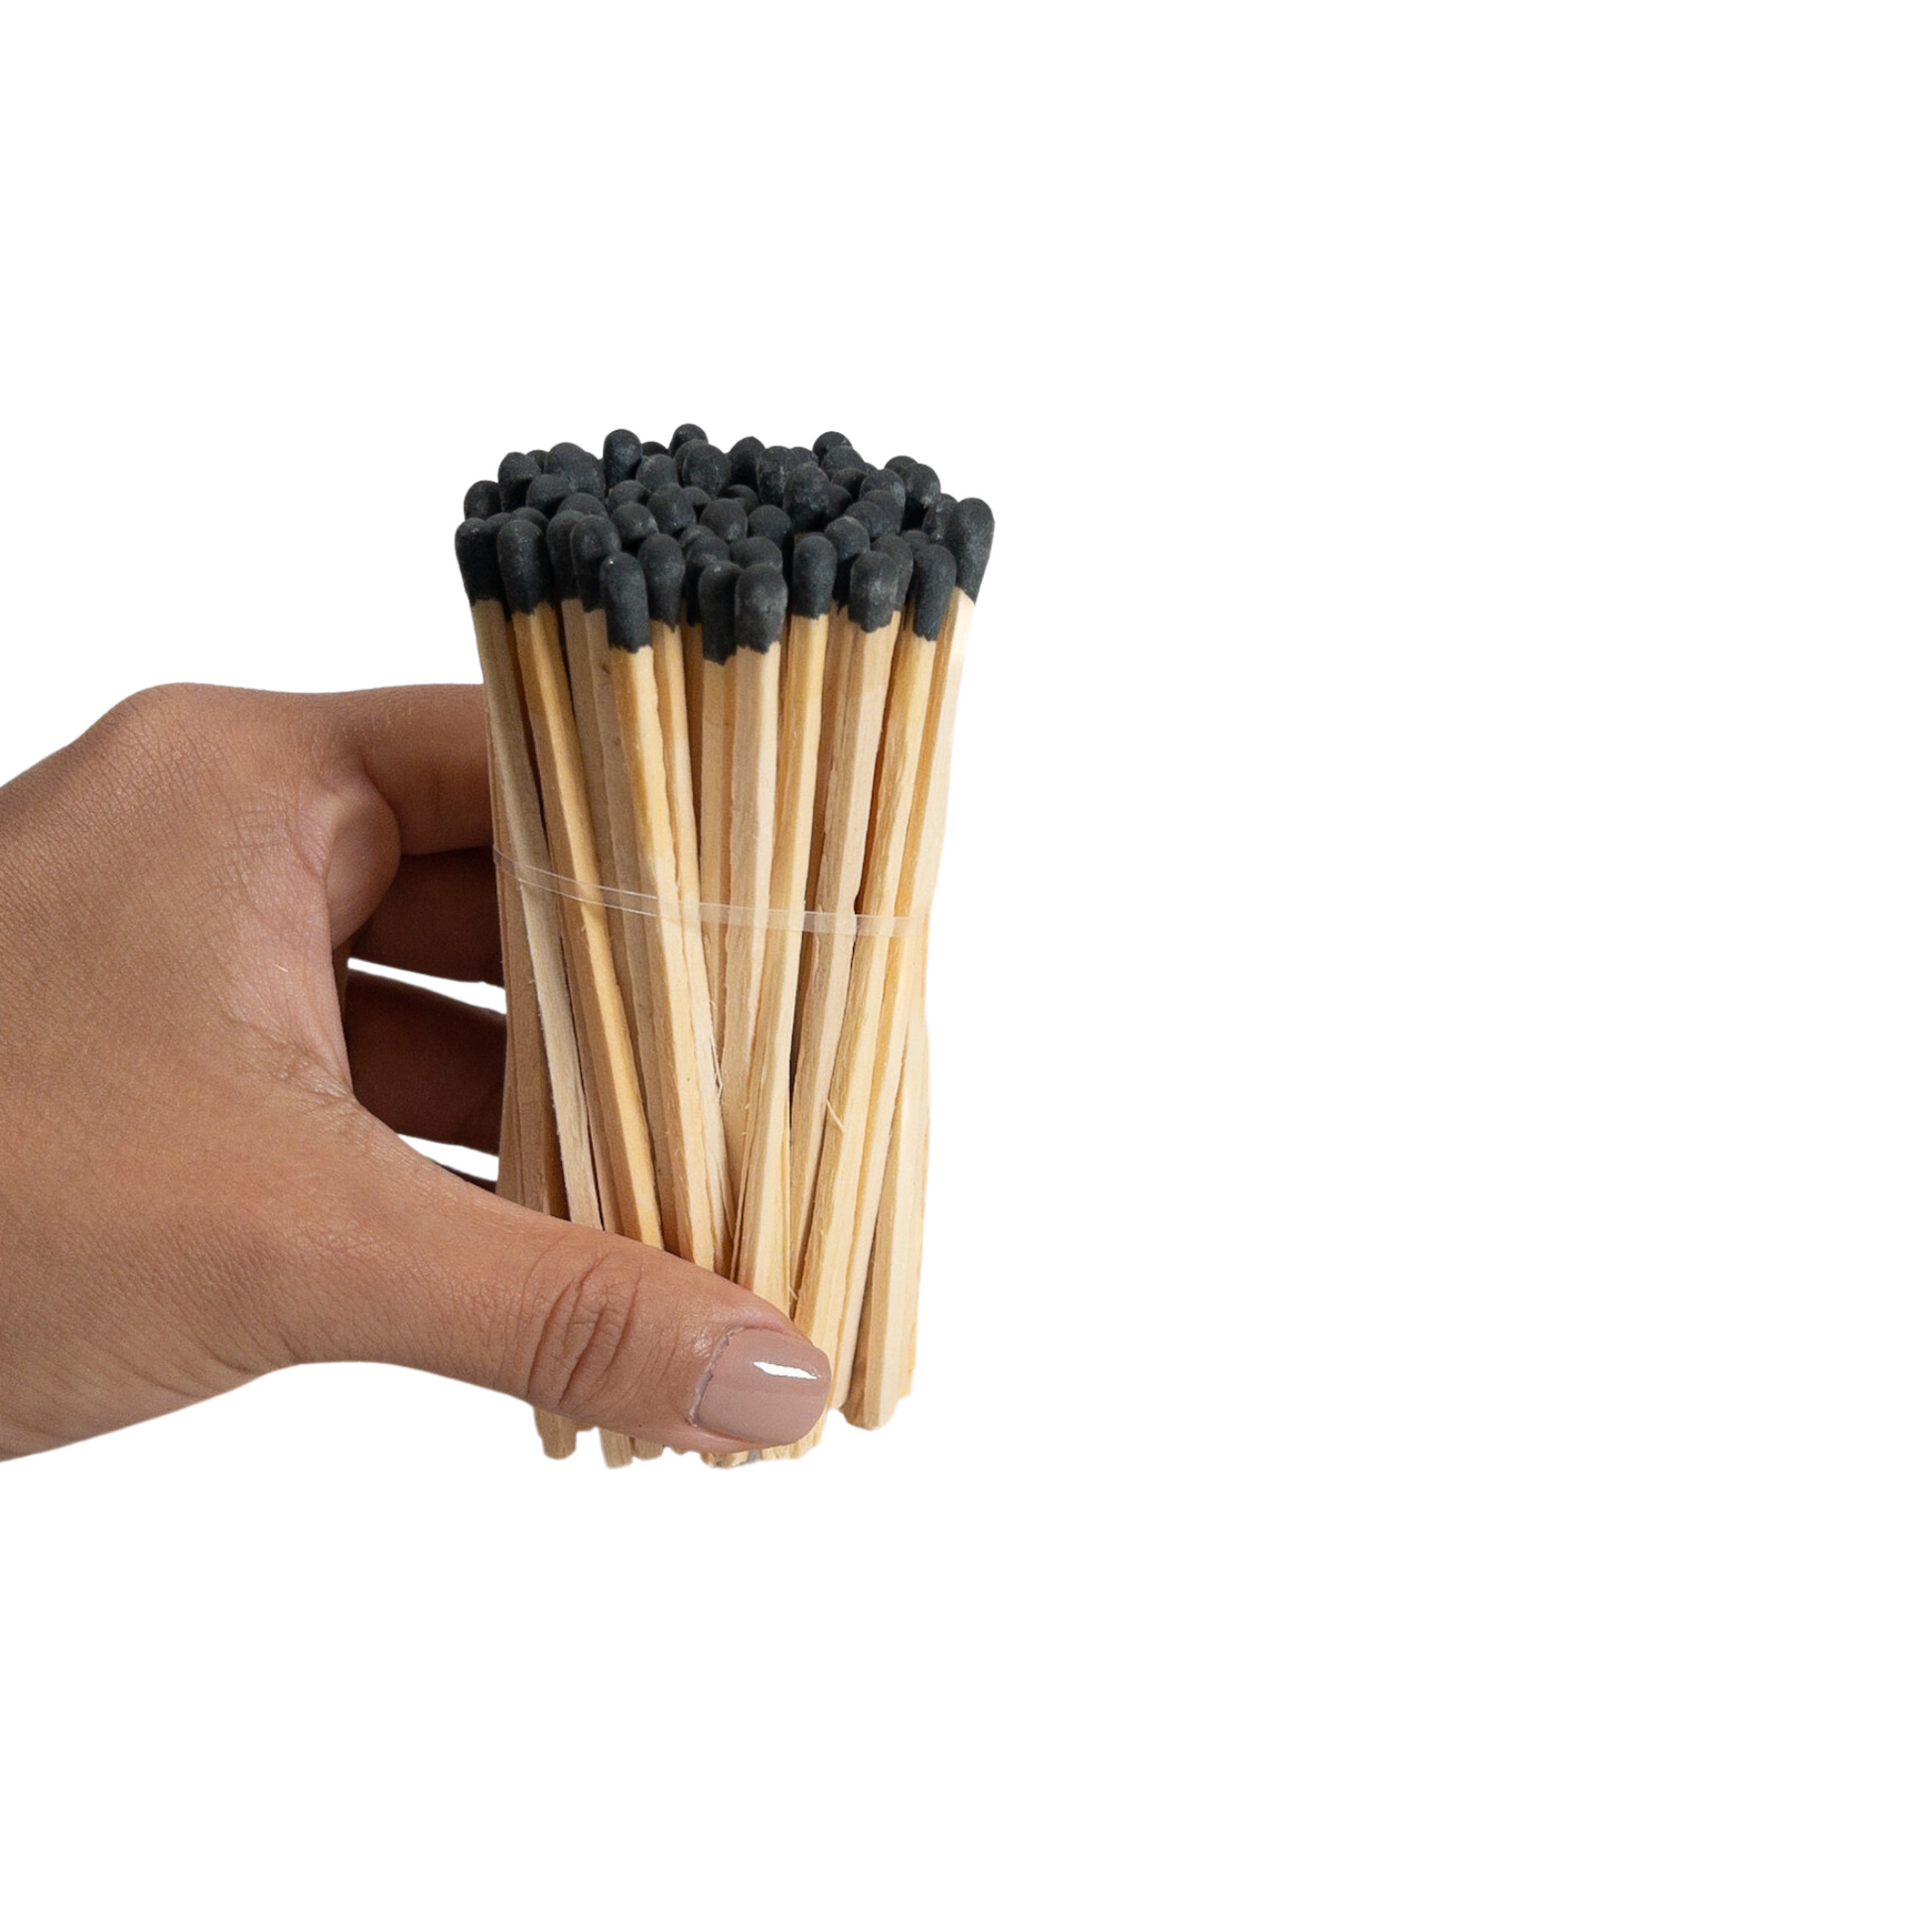 Find Elegant Wood Matches in Bulk For Varied Purposes 